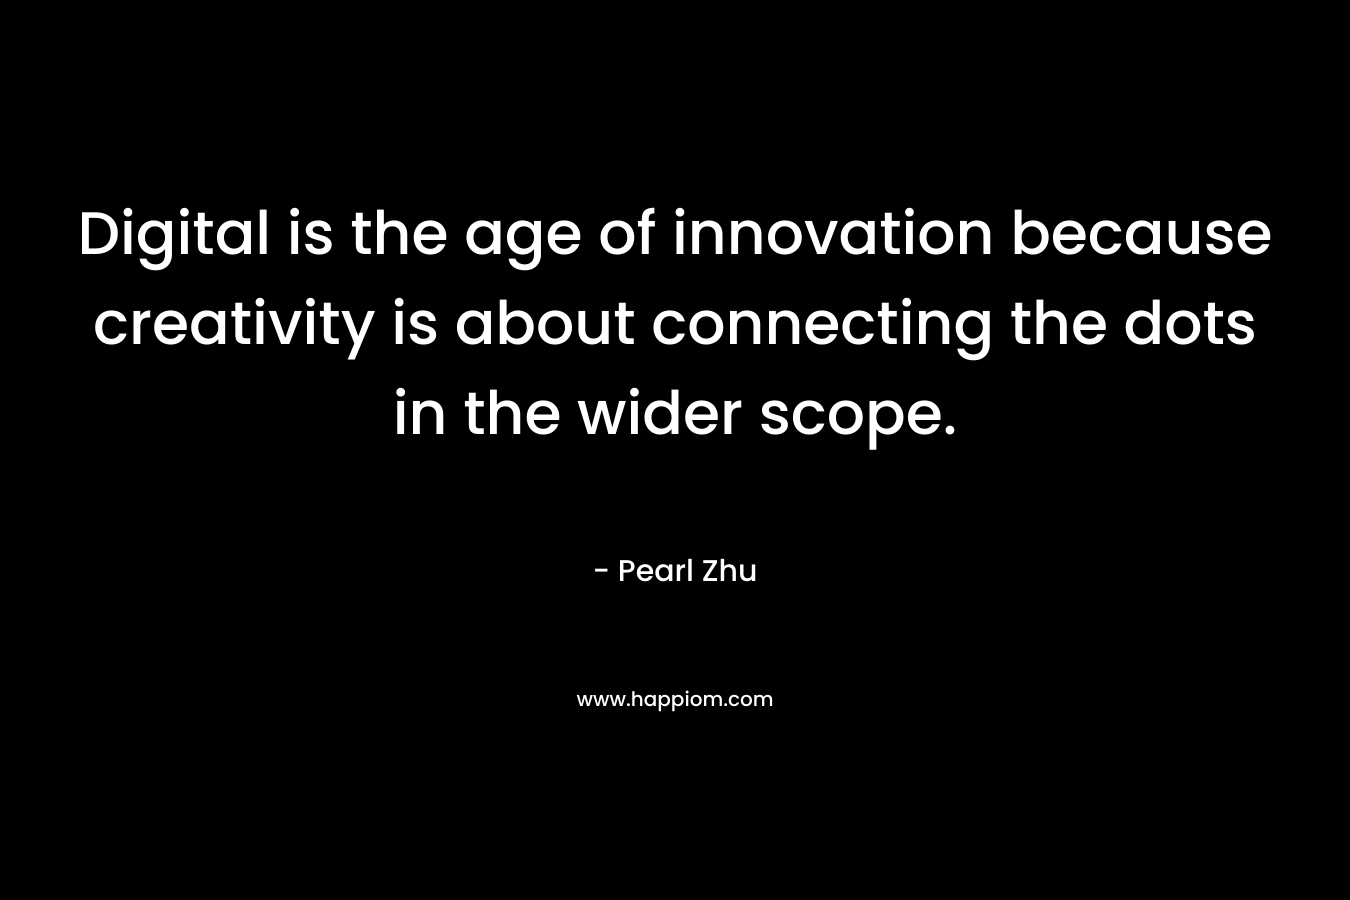 Digital is the age of innovation because creativity is about connecting the dots in the wider scope. – Pearl Zhu